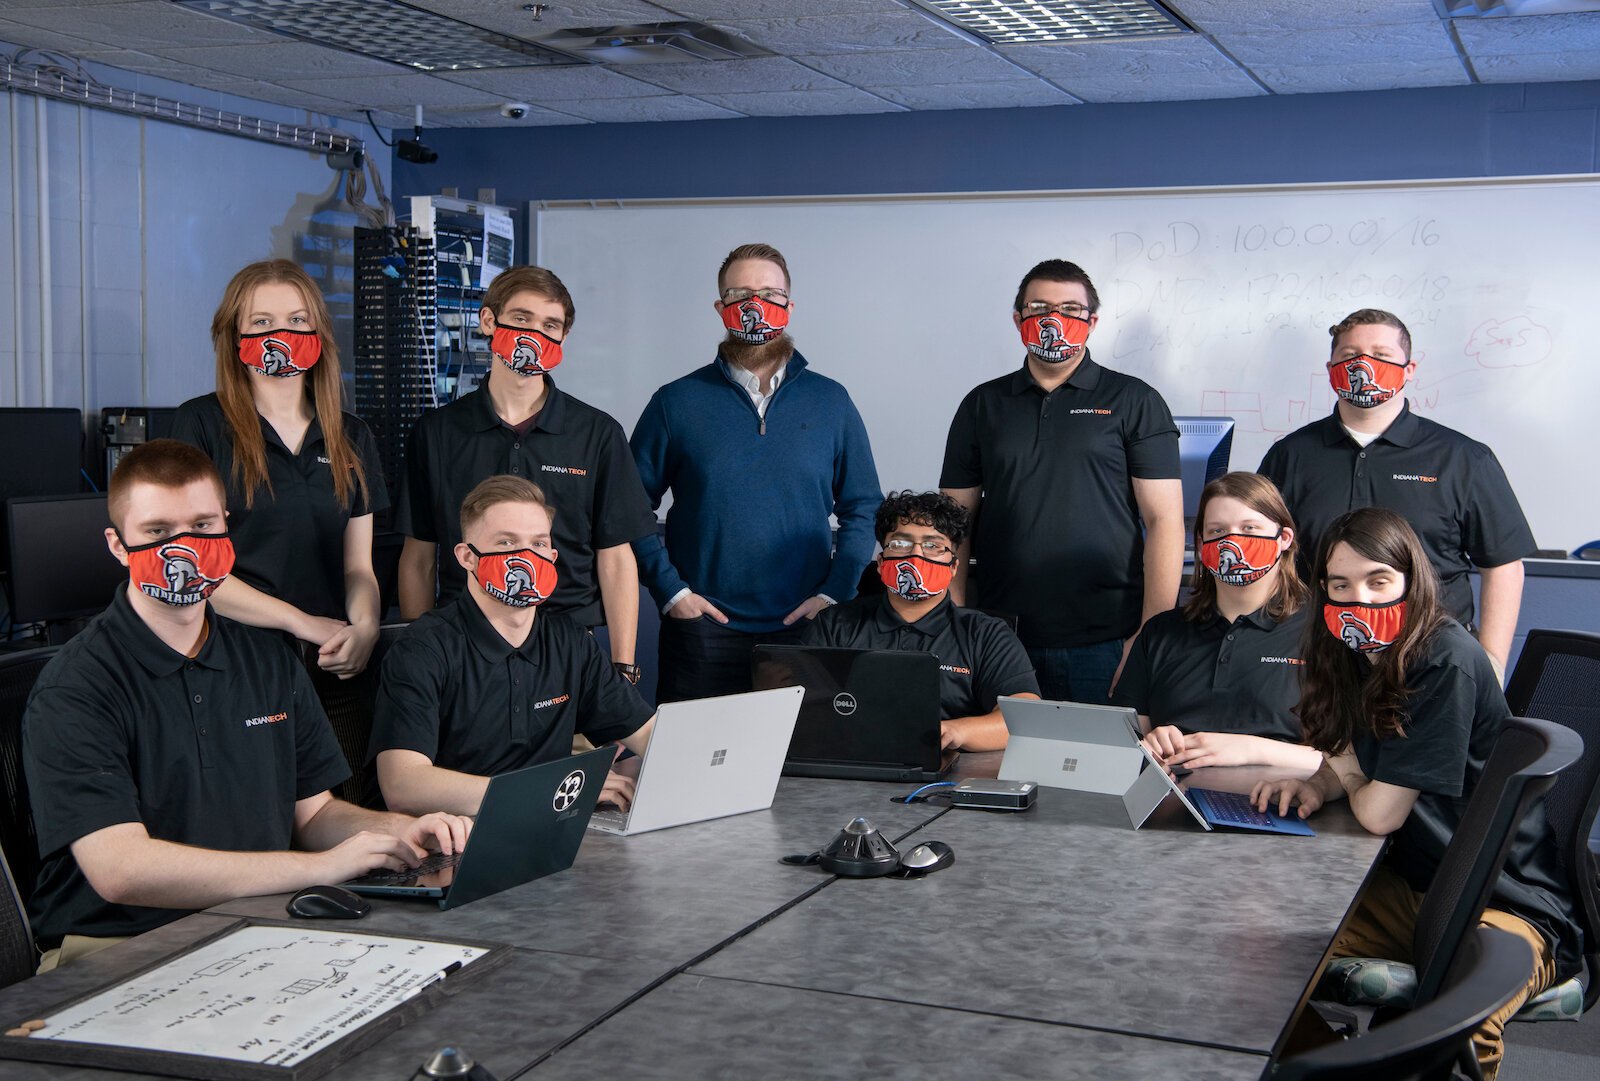 Since 2006, the Indiana Tech Cyber Warriors have grown into an elite collegiate cyber competition team.